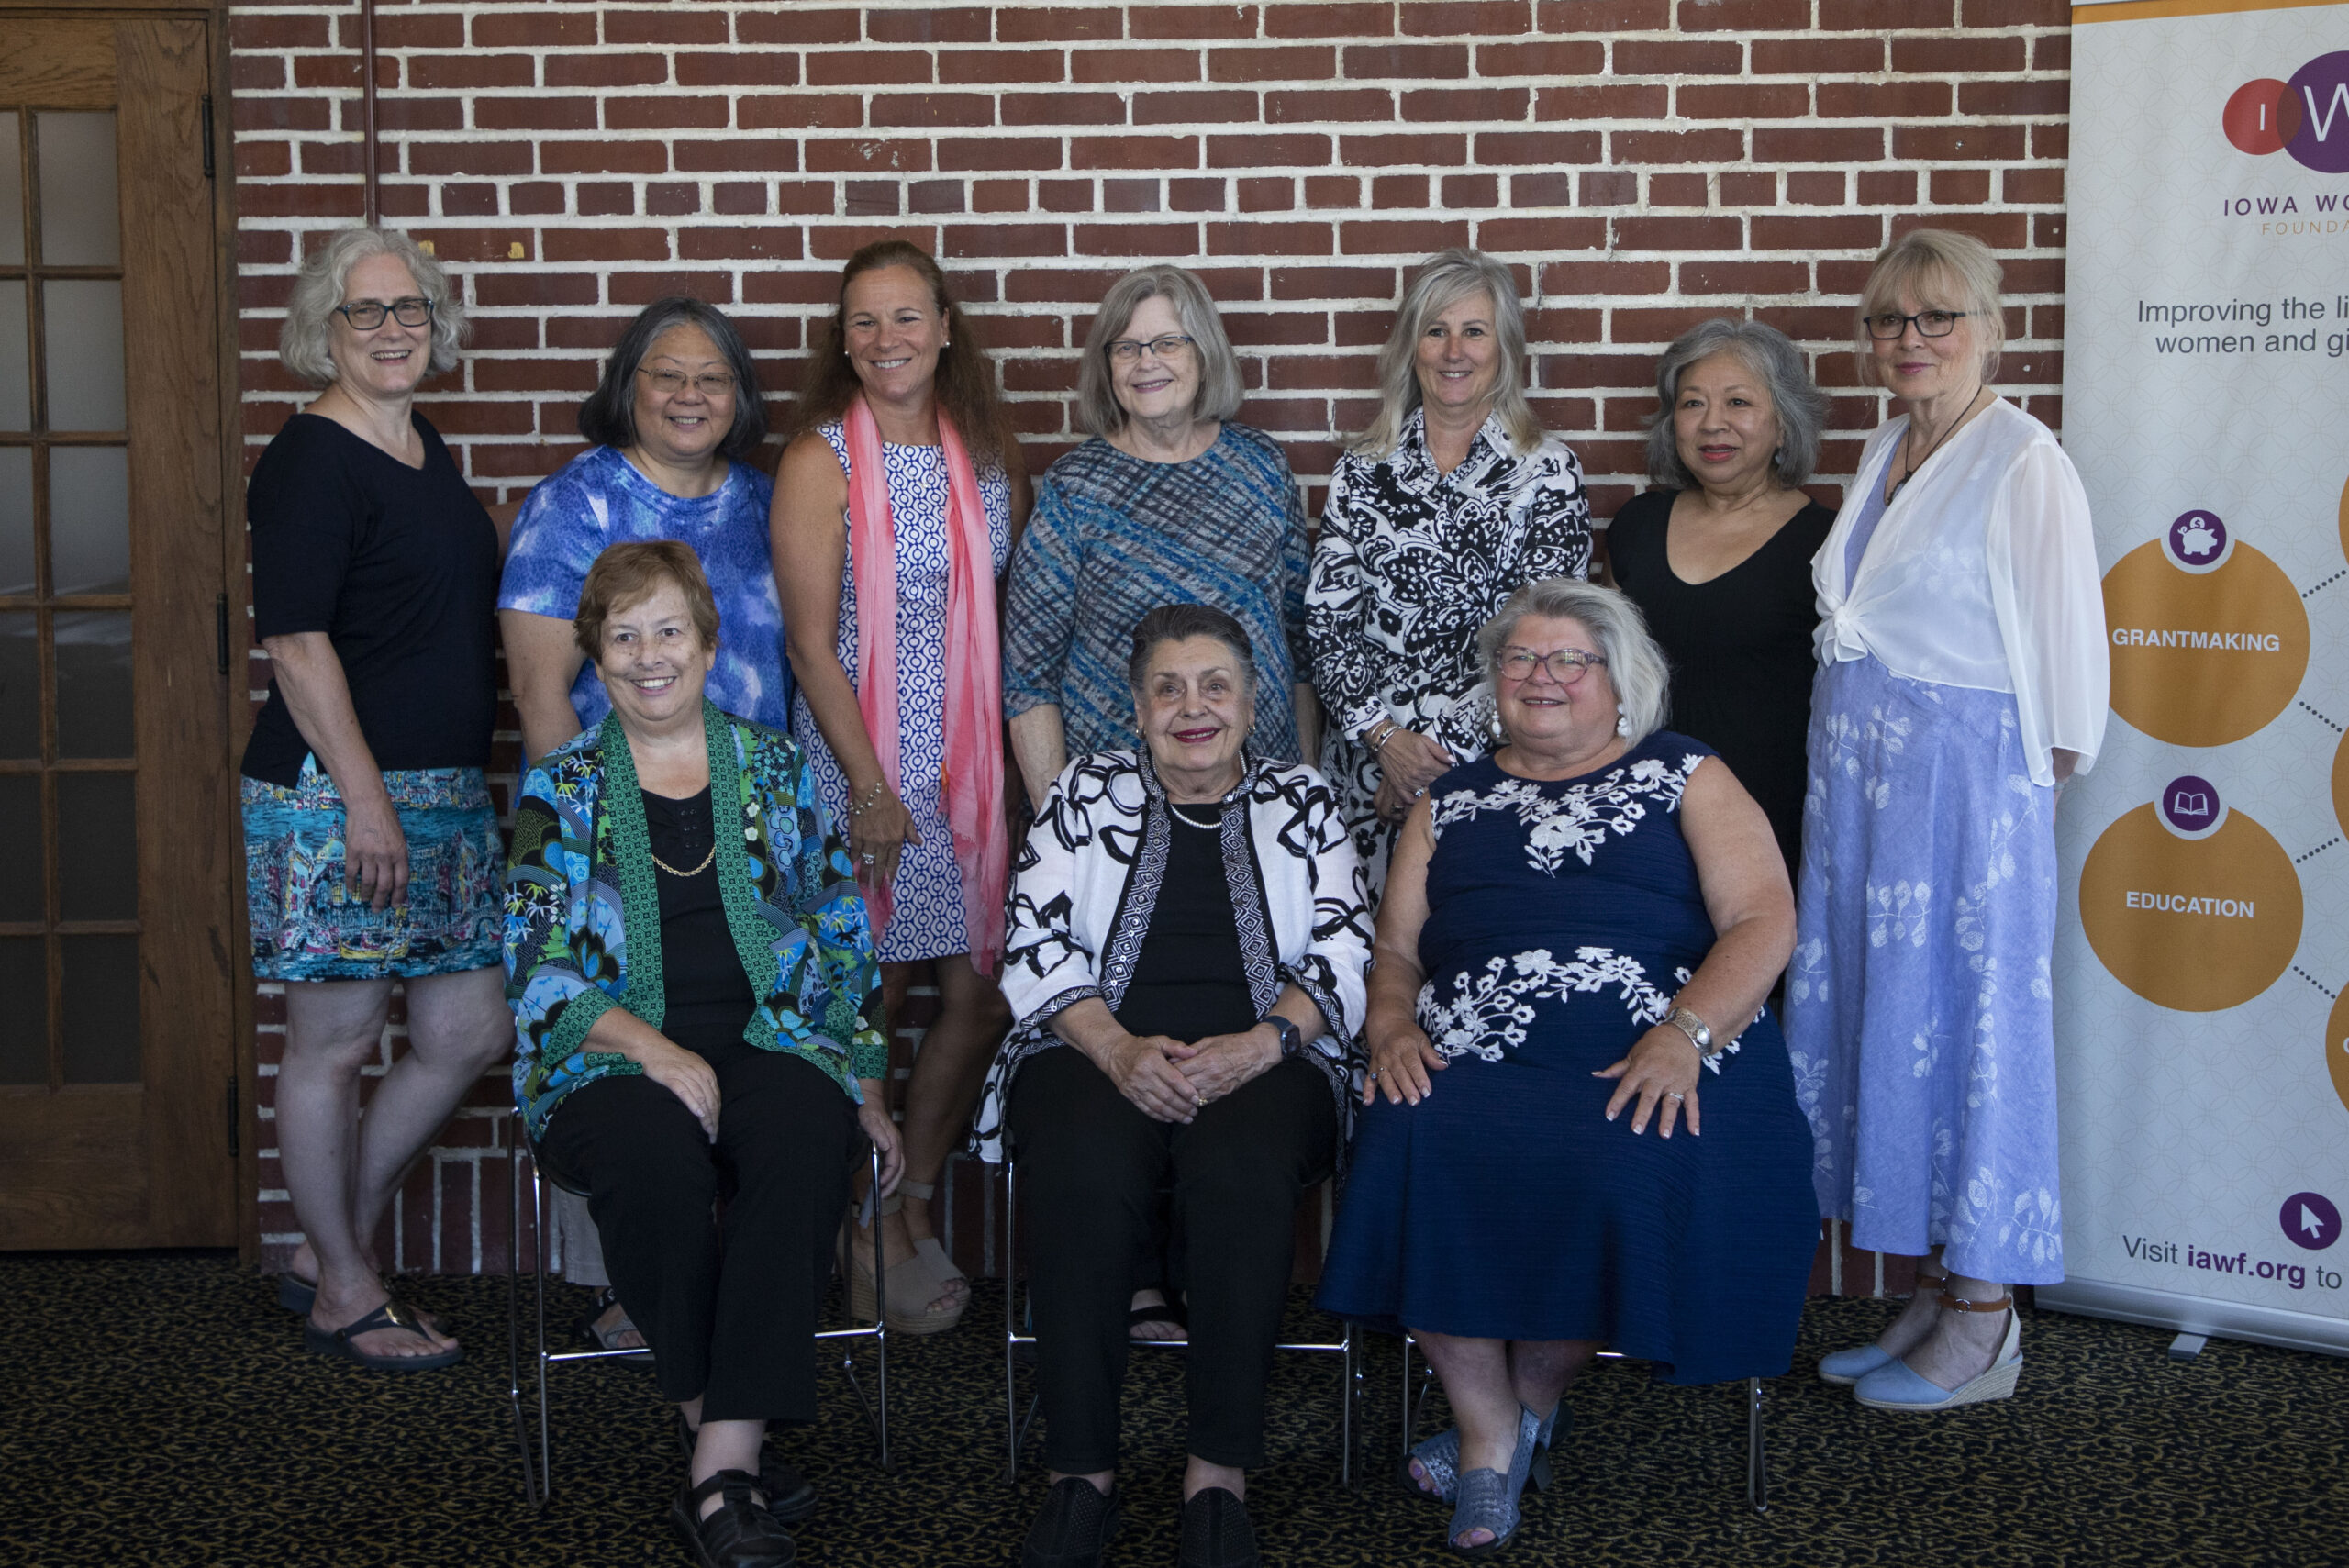 Iowa Women's Foundation founders gather for their event.